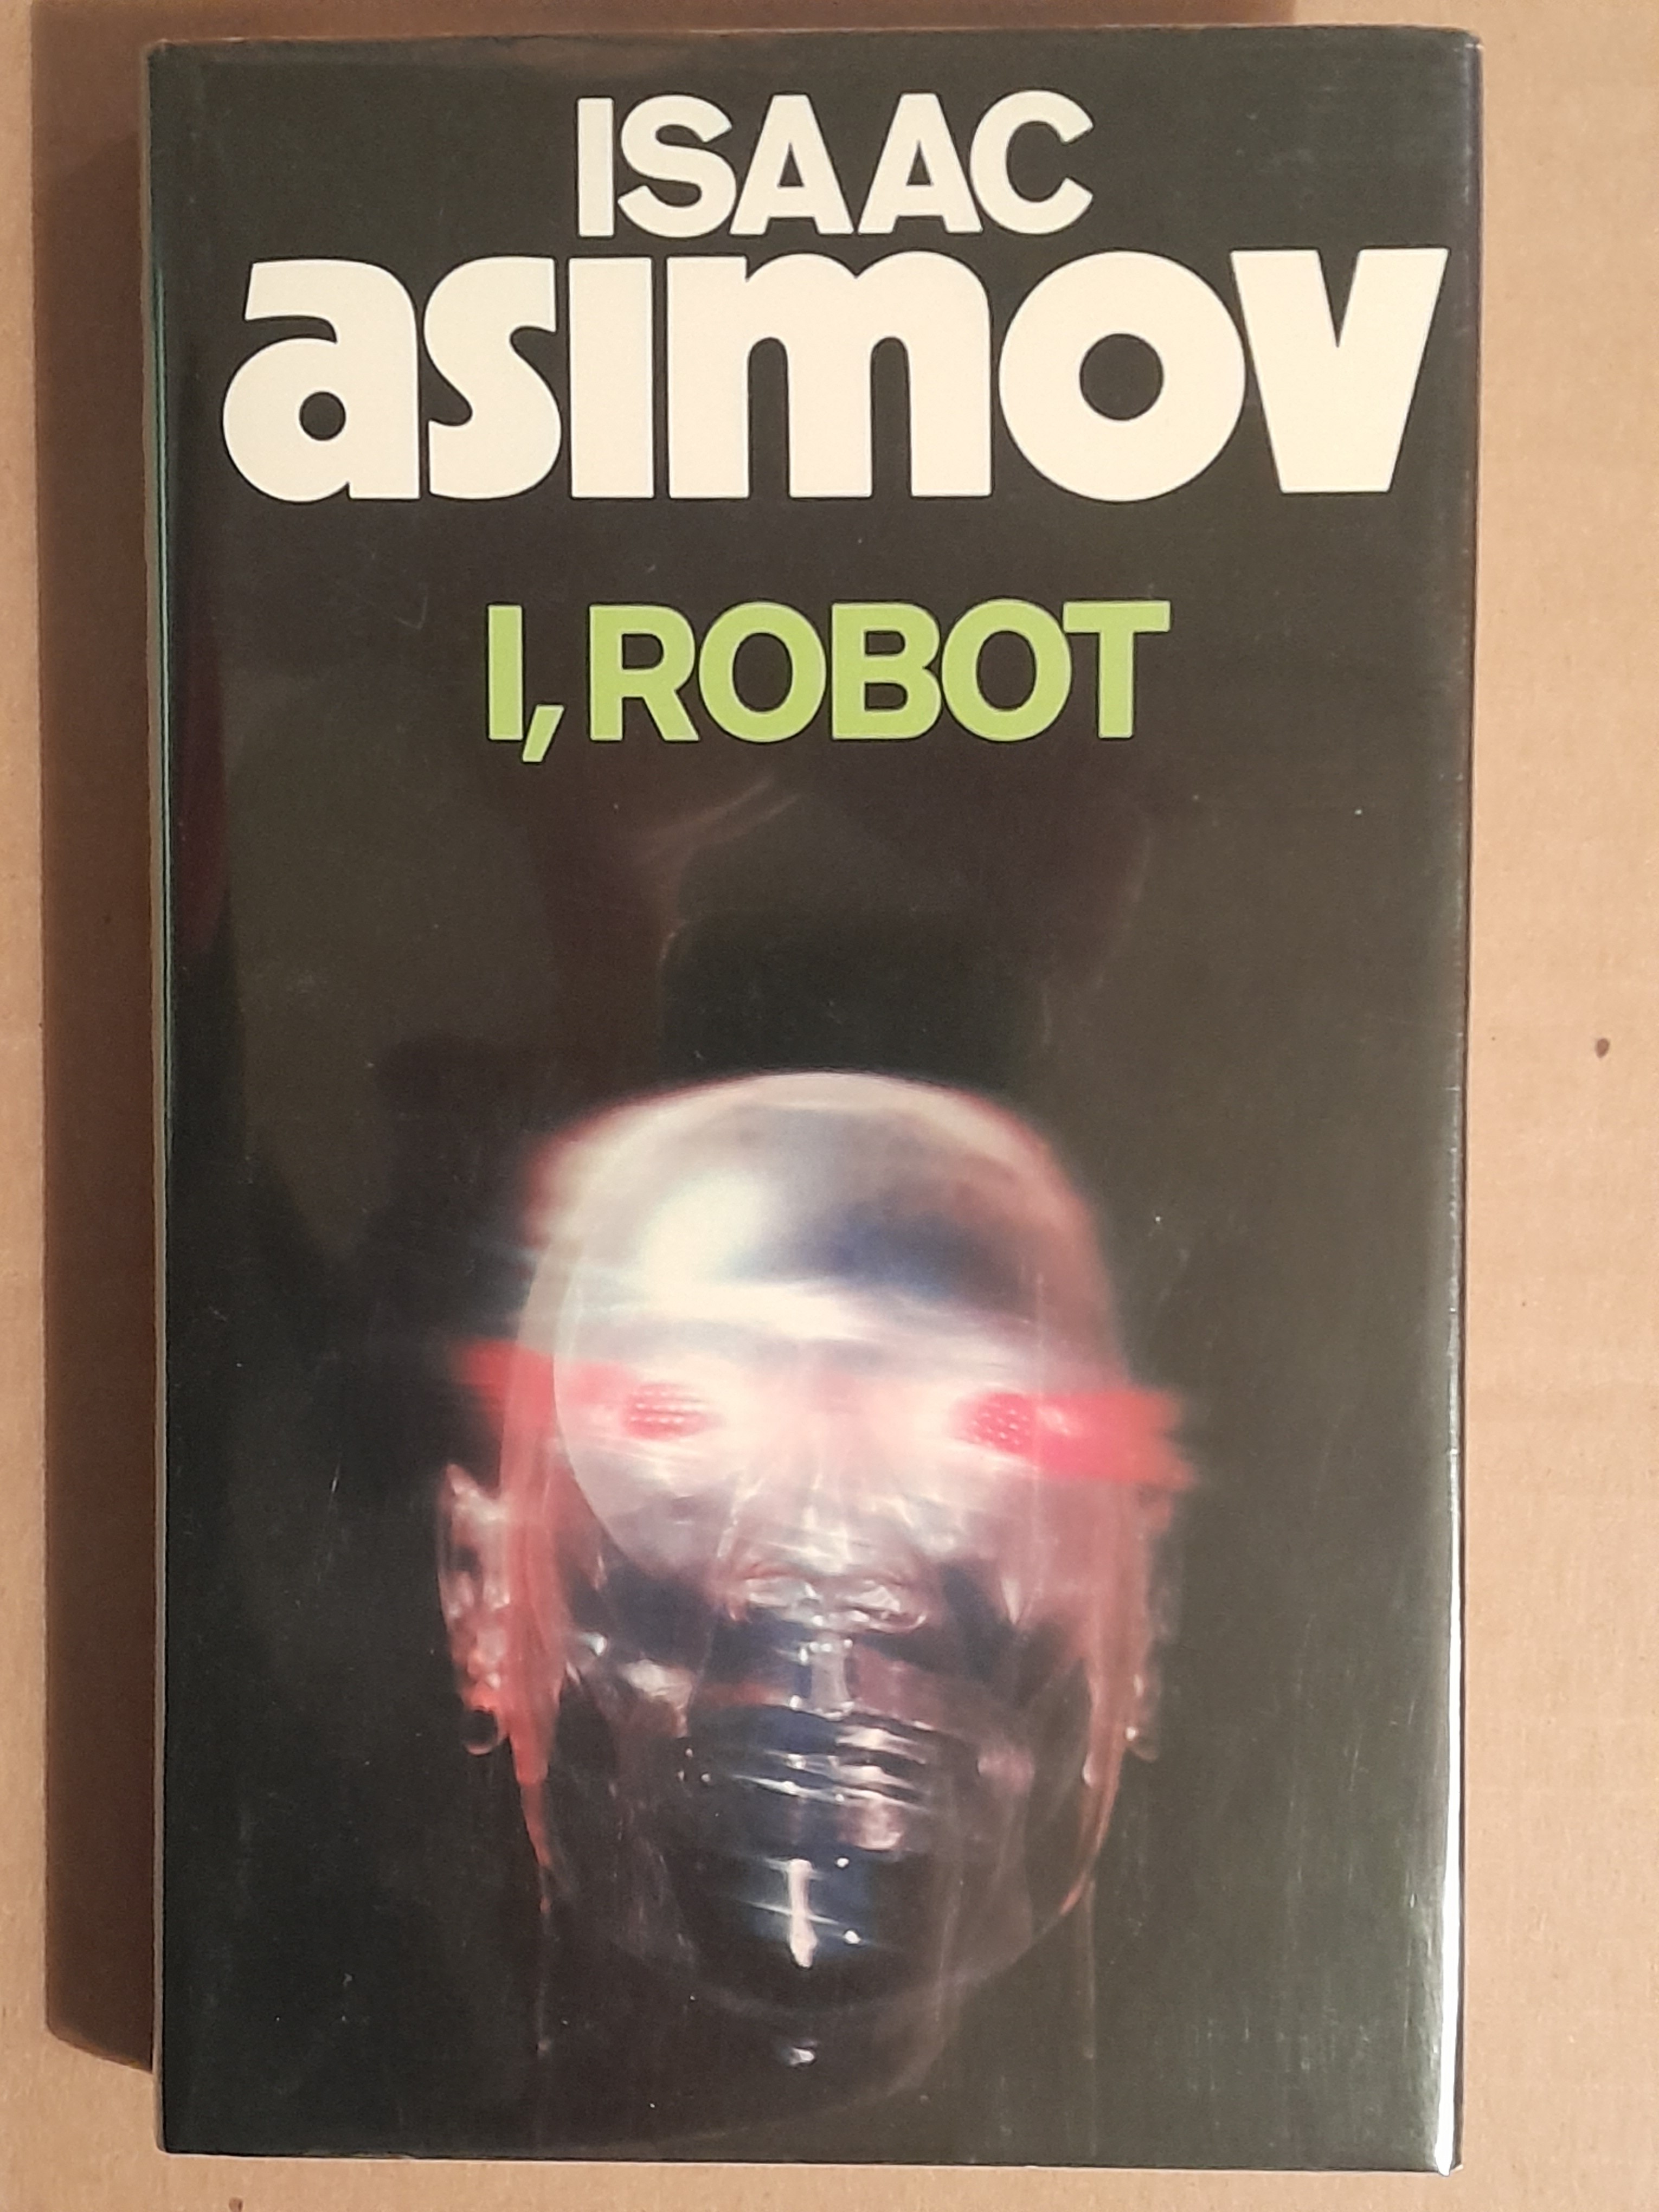 I, Robot; The Rest of the Robots; The Bicentennial Man and Other Stories; The Caves of Steel; The Naked Sun; The Robots of Dawn; Robots and Empire (7 vols) - Asimov, Isaac (with Robert Silverberg) (jacket art by Dennis Rolfe, Ralph McQuarrie, Peter Mennim, & Chris Foss)